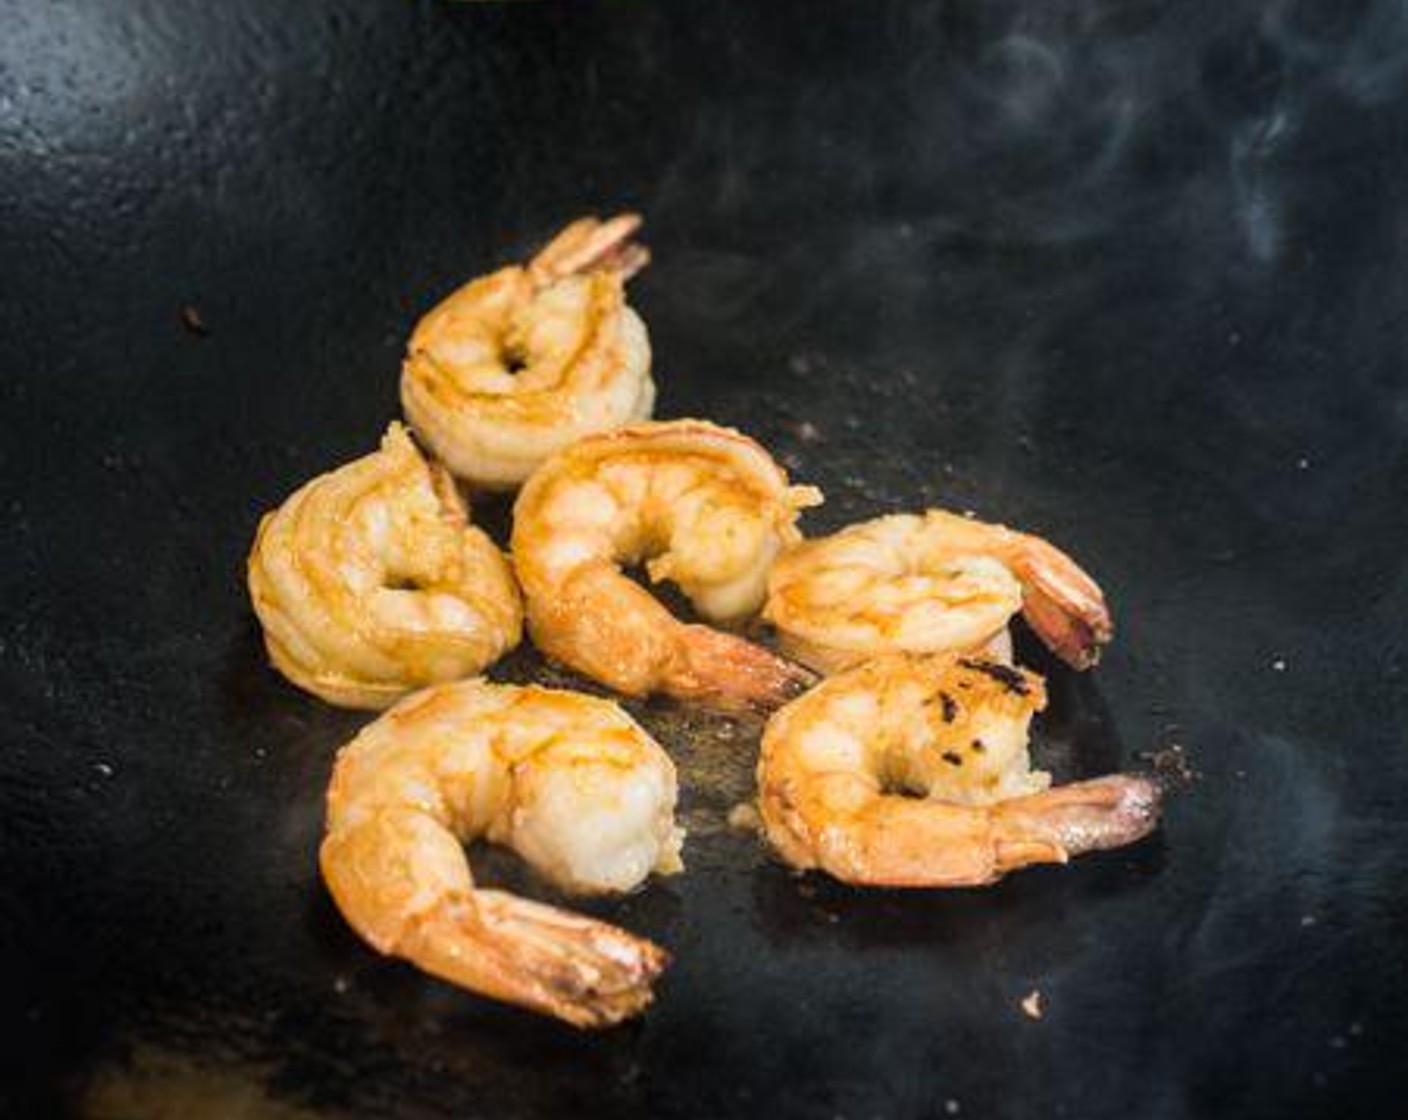 step 5 Heat Peanut Oil (1 Tbsp) in a wok over medium-high heat. Stir-fry the Large Shrimp (6) for 30 seconds, add 1/2 tablespoon of the Pad Thai sauce, then fry for the shrimp for 30 more seconds or until the shrimp are fully cooked. Remove from the wok and set aside.